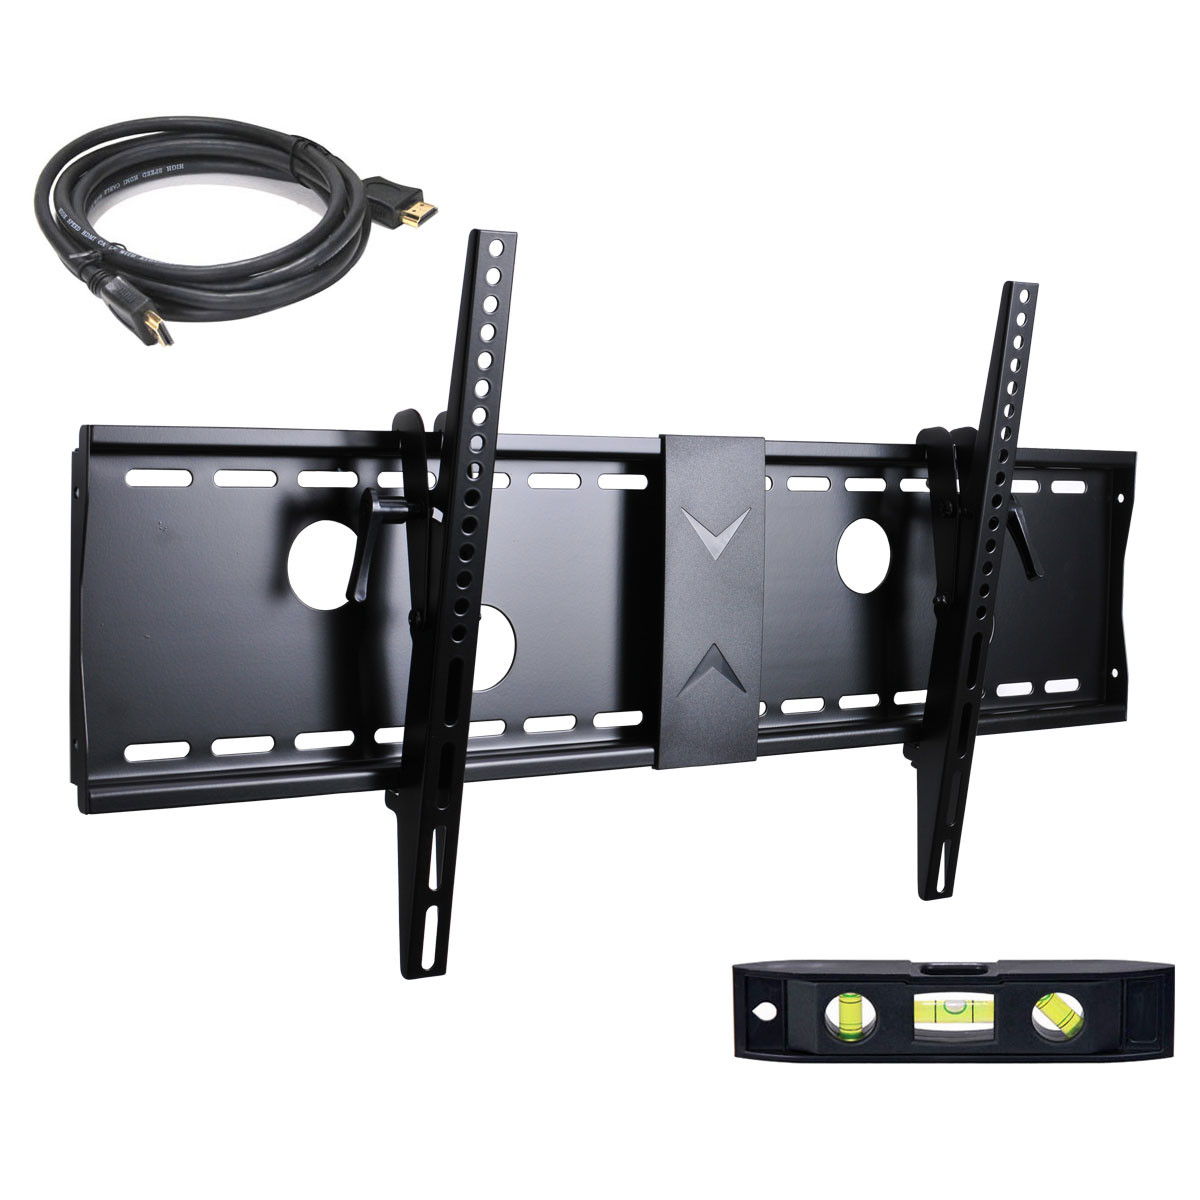 VideoSecu TV Wall Mount Monitor Bracket with Full Motion